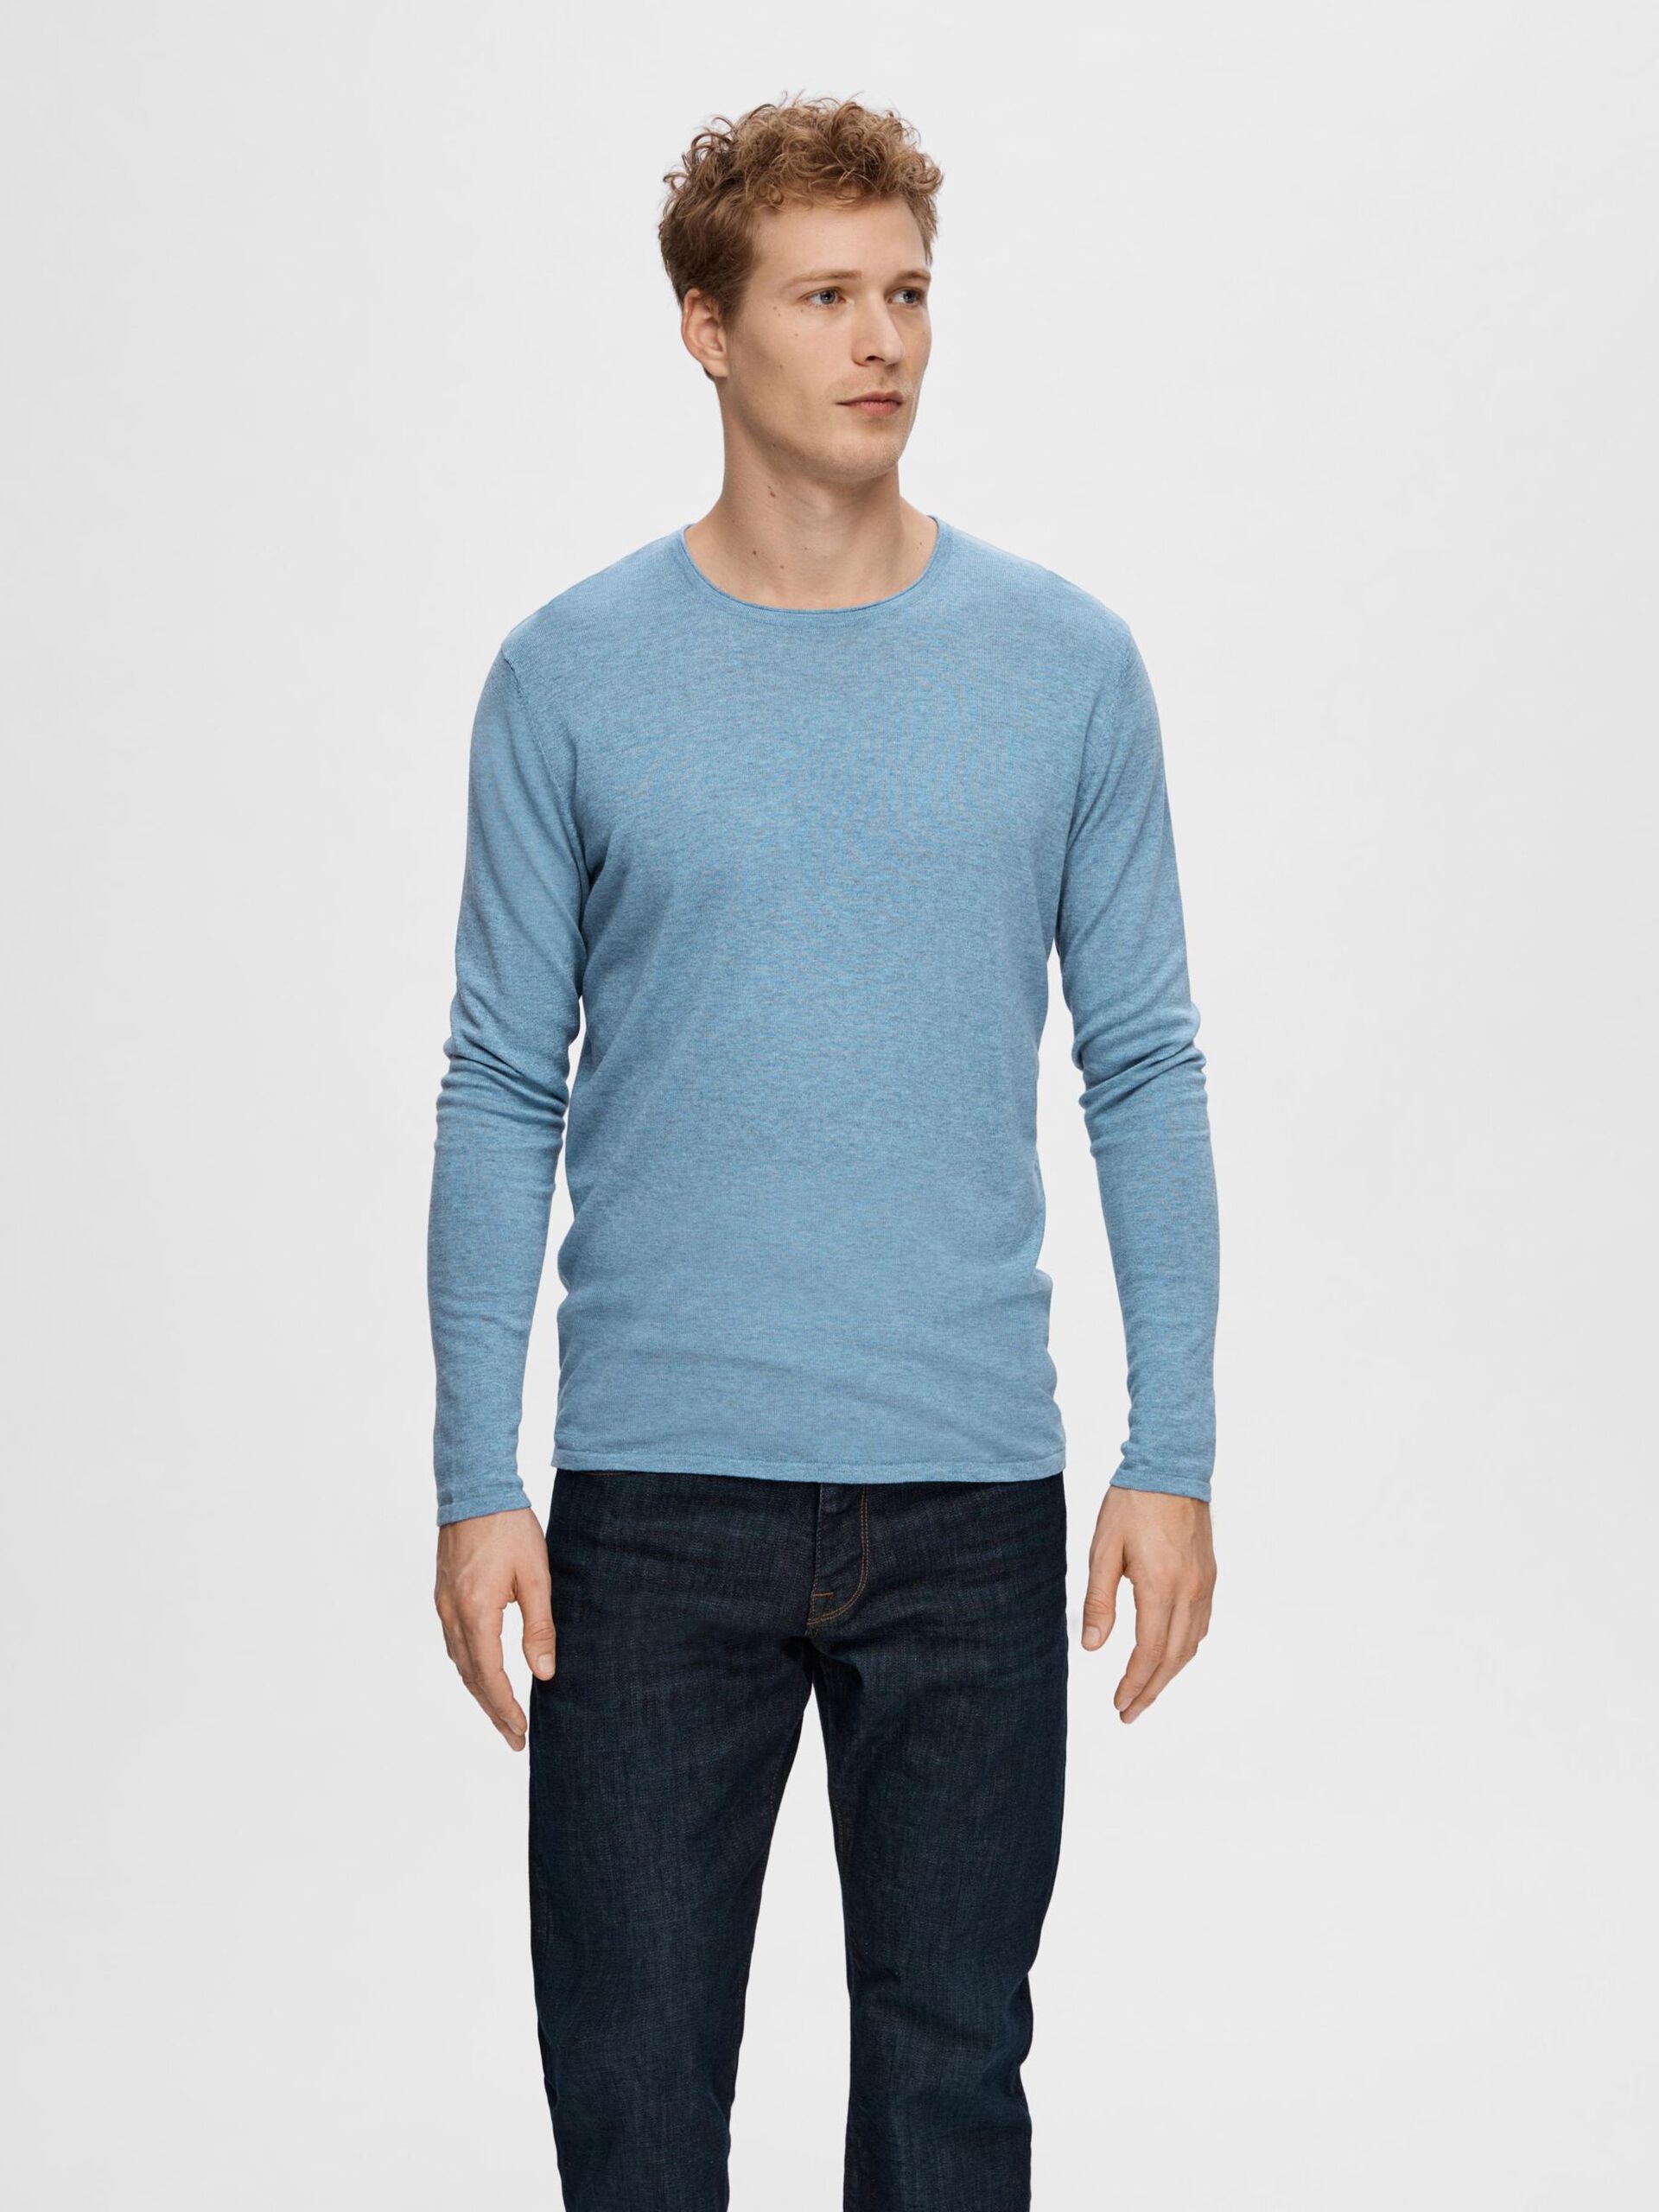 SELECTED | LANGÄRMELIGER PULLOVER | Blue shadow